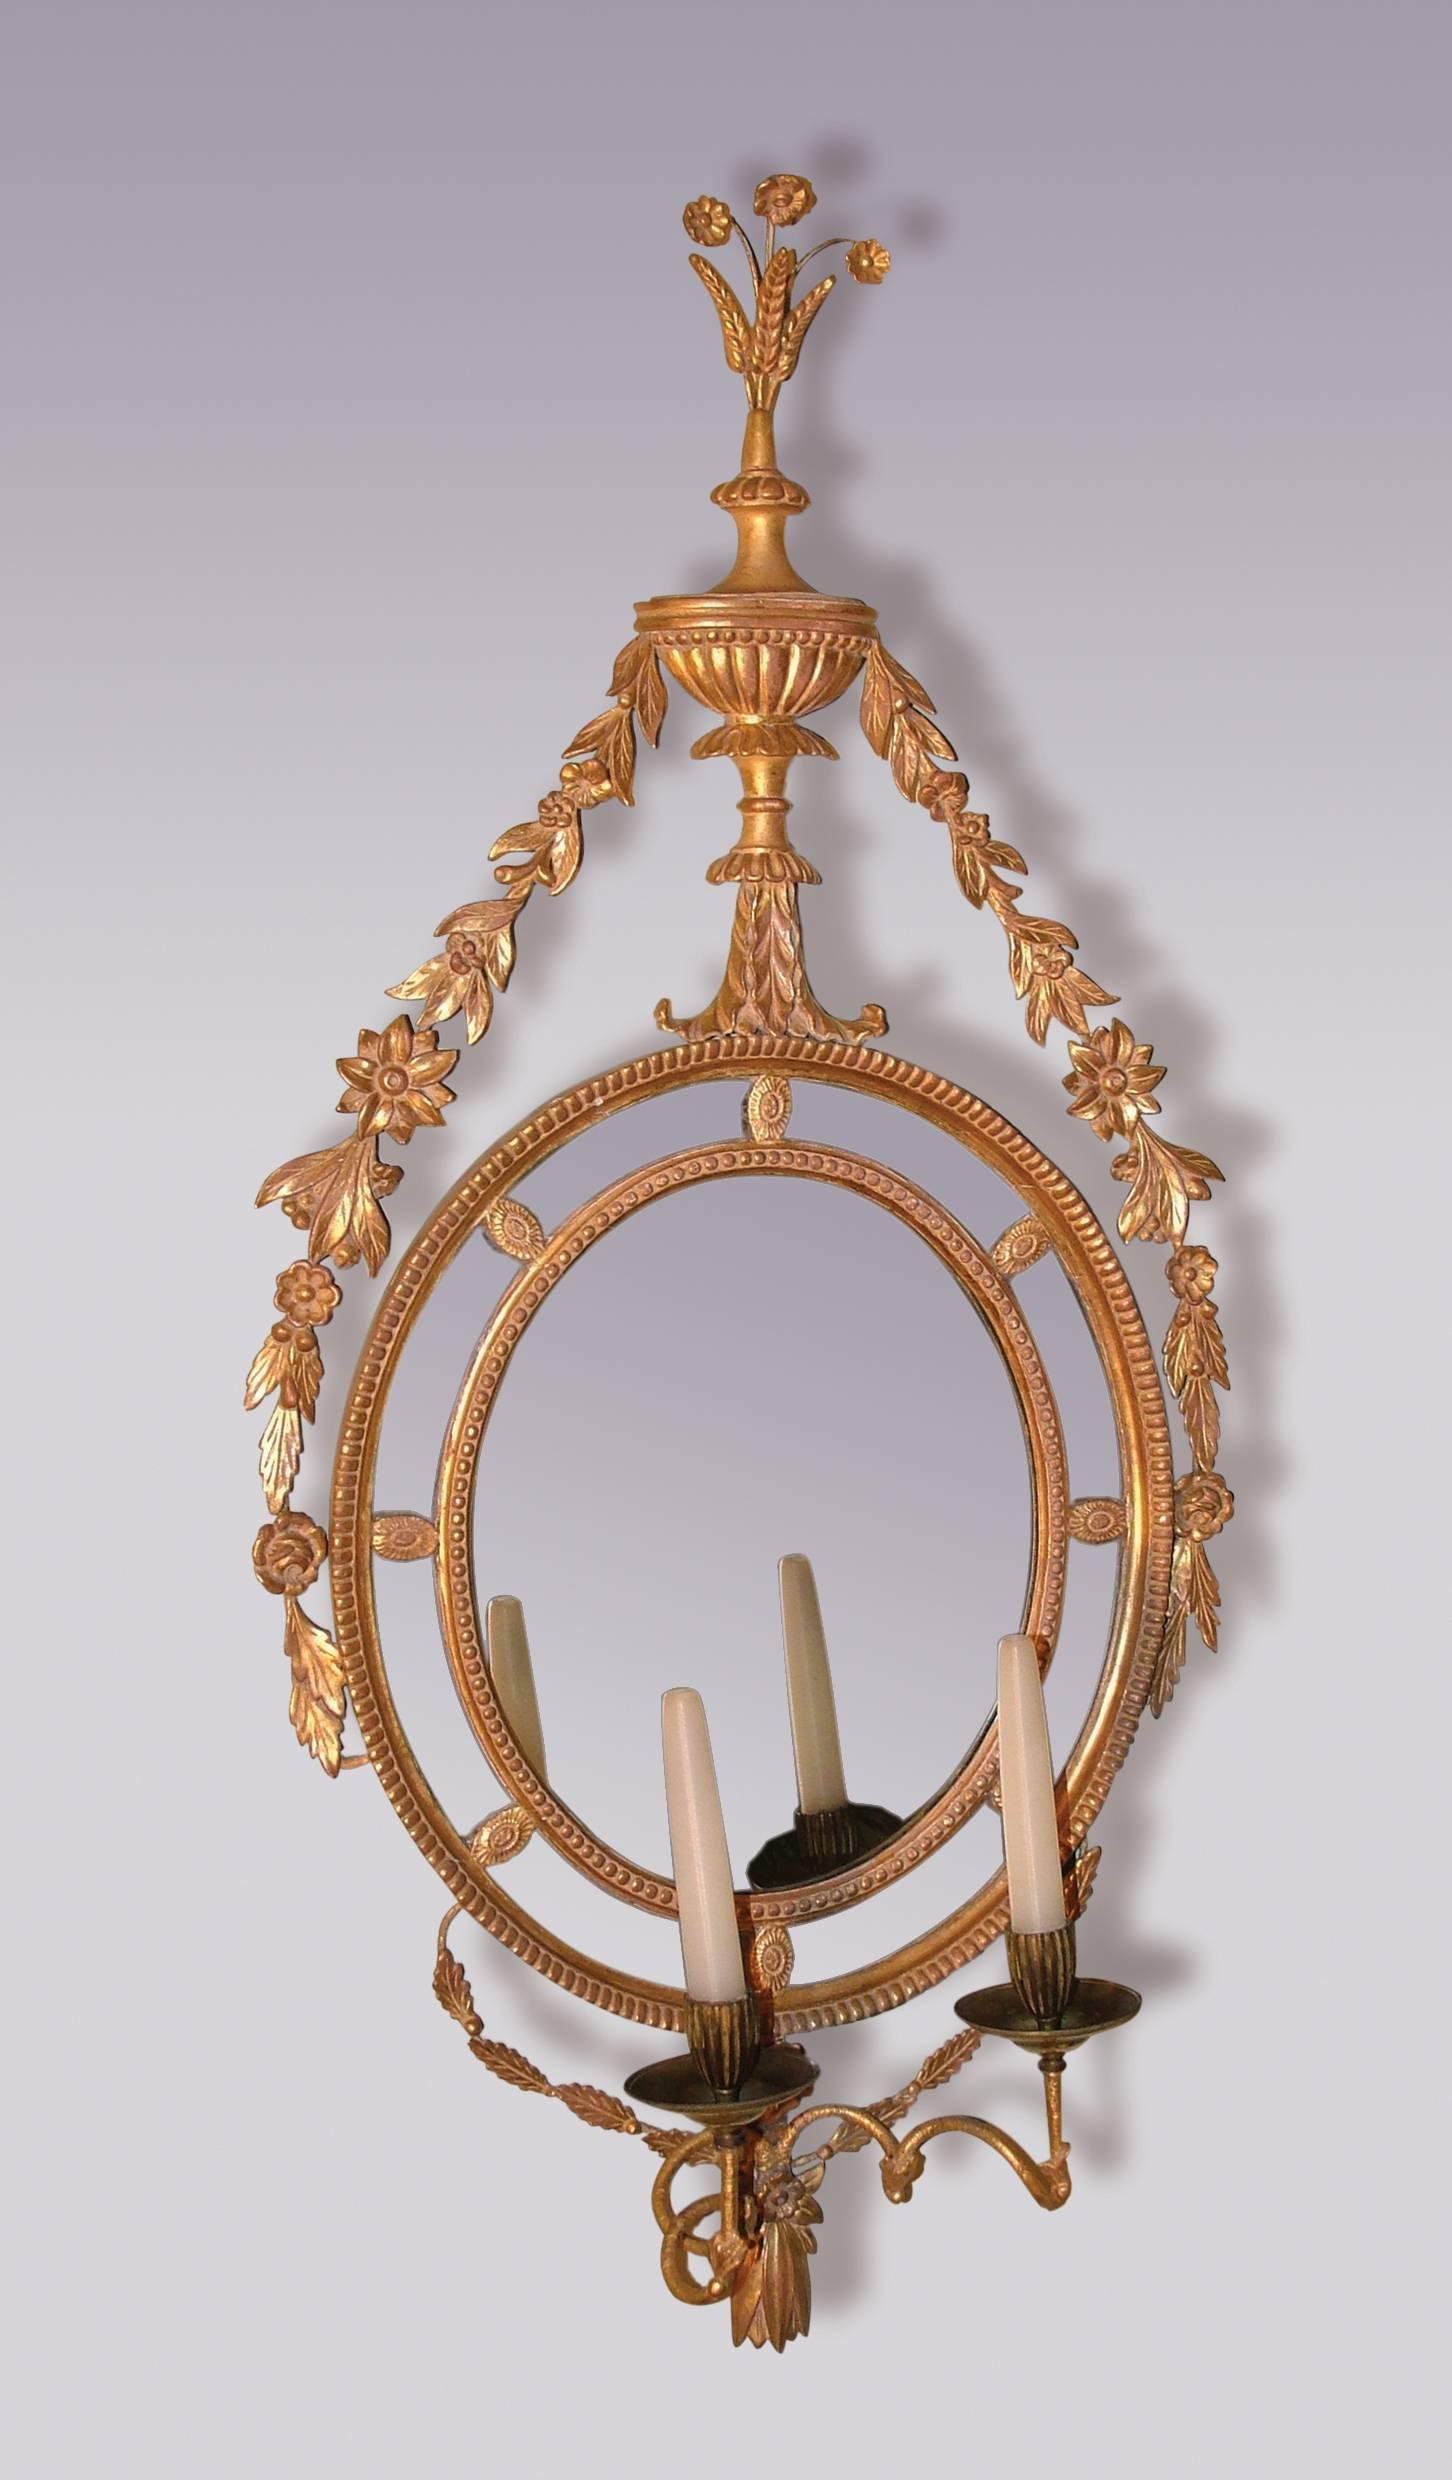 A pair of late 18th century Adam period giltwood two-light girandoles in the form of oval border glass mirrors with ornate leaf and flower carved swags, having urn pediments surmounted by wheat ear decoration. Some carvings and crestings possibly